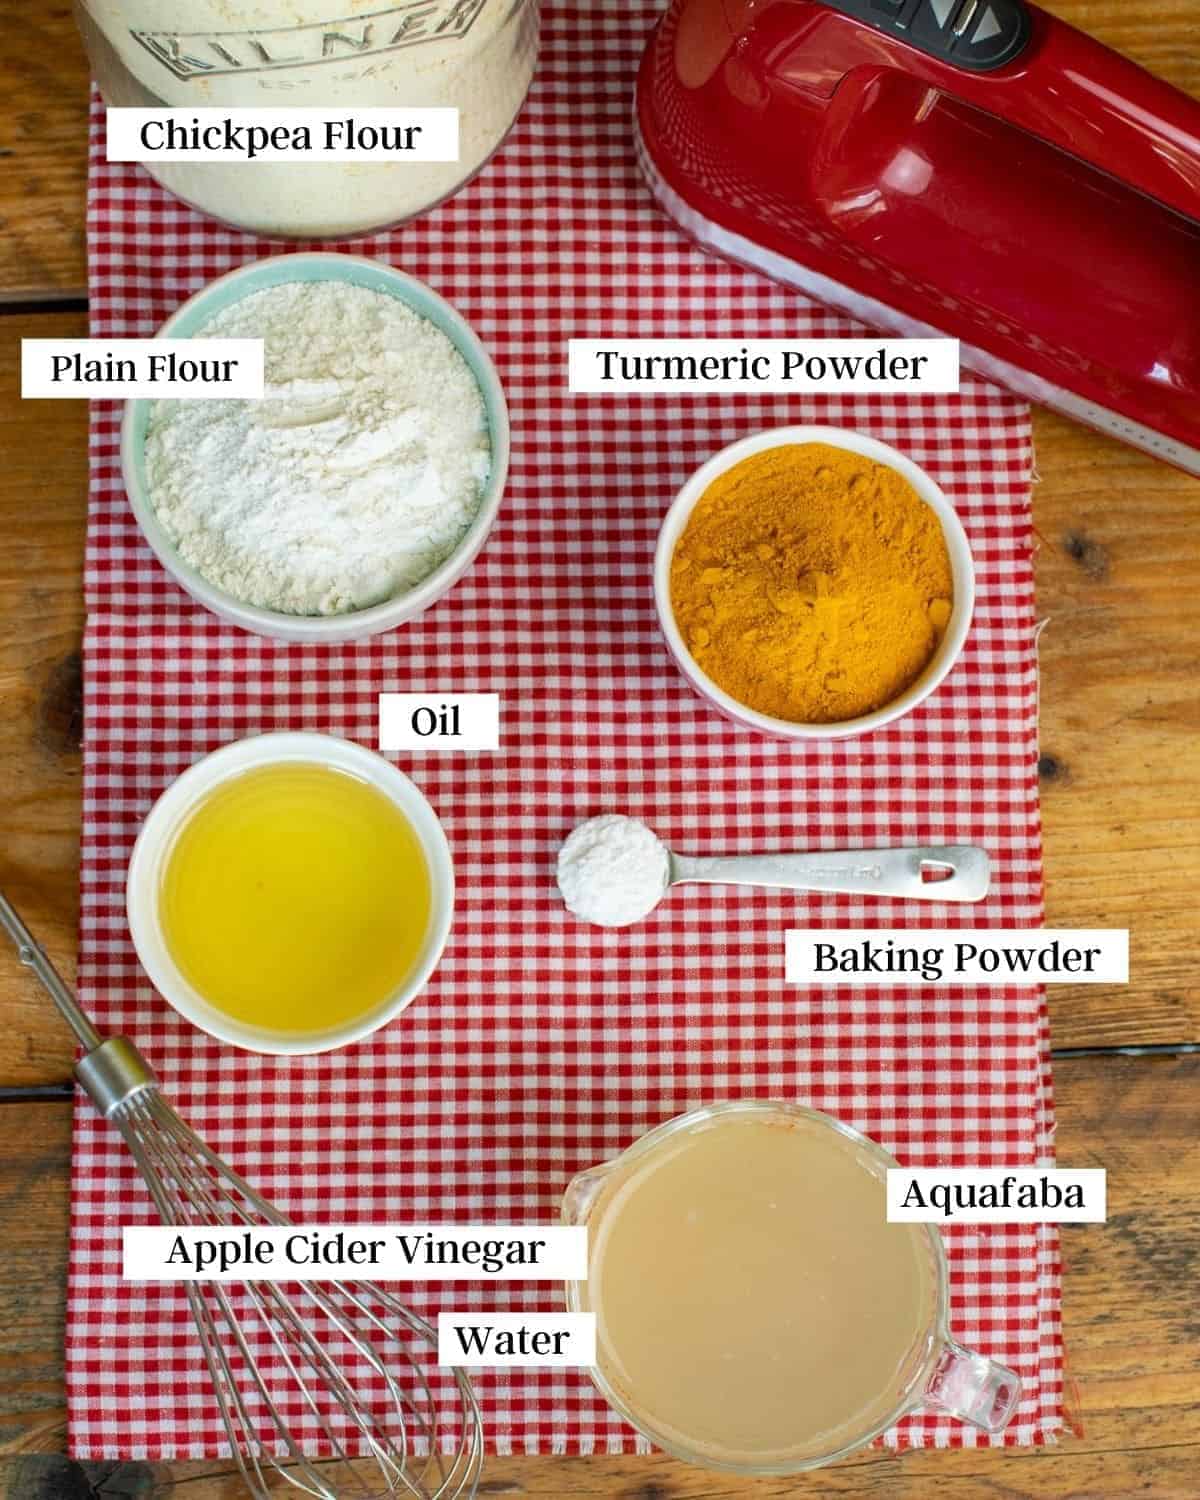 Vegan Yorkshire puddings ingredients laid out on a cloth.